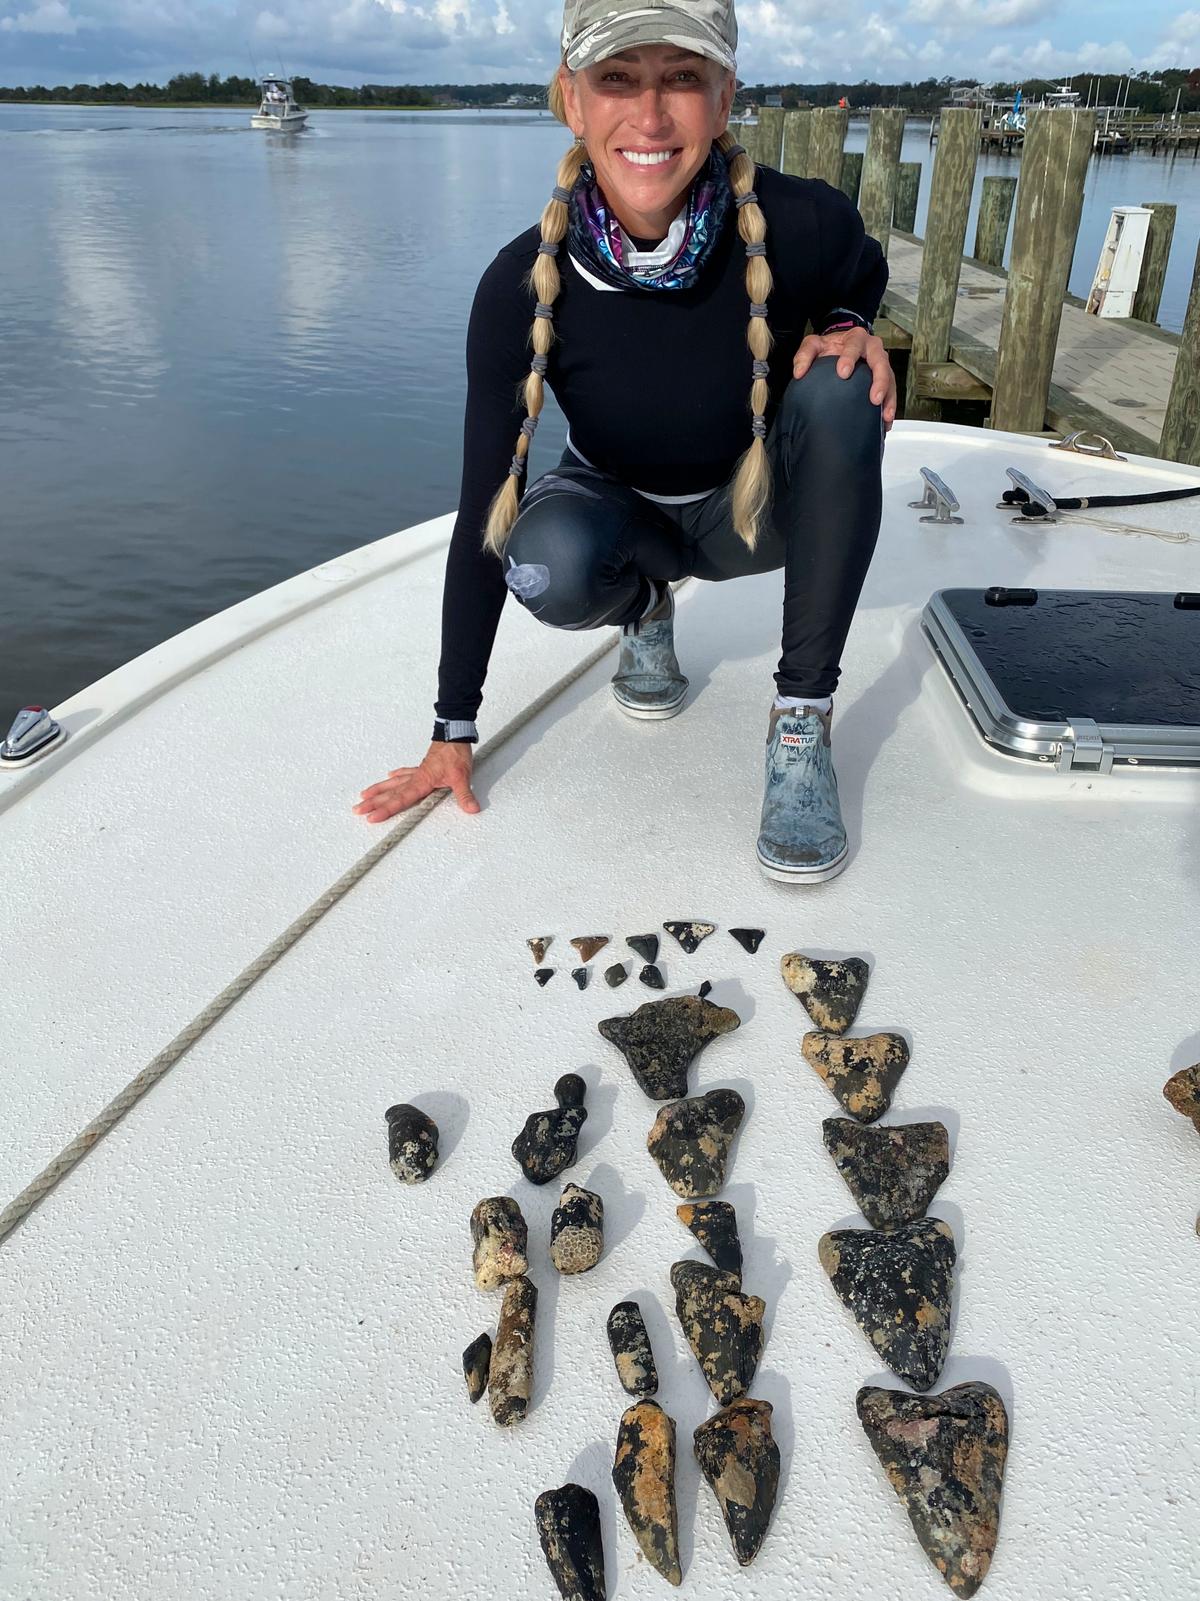 Terri Olah, 53, with some of the teeth she found on a recent dive. The megalodon teeth are on the far right. (Caters News)